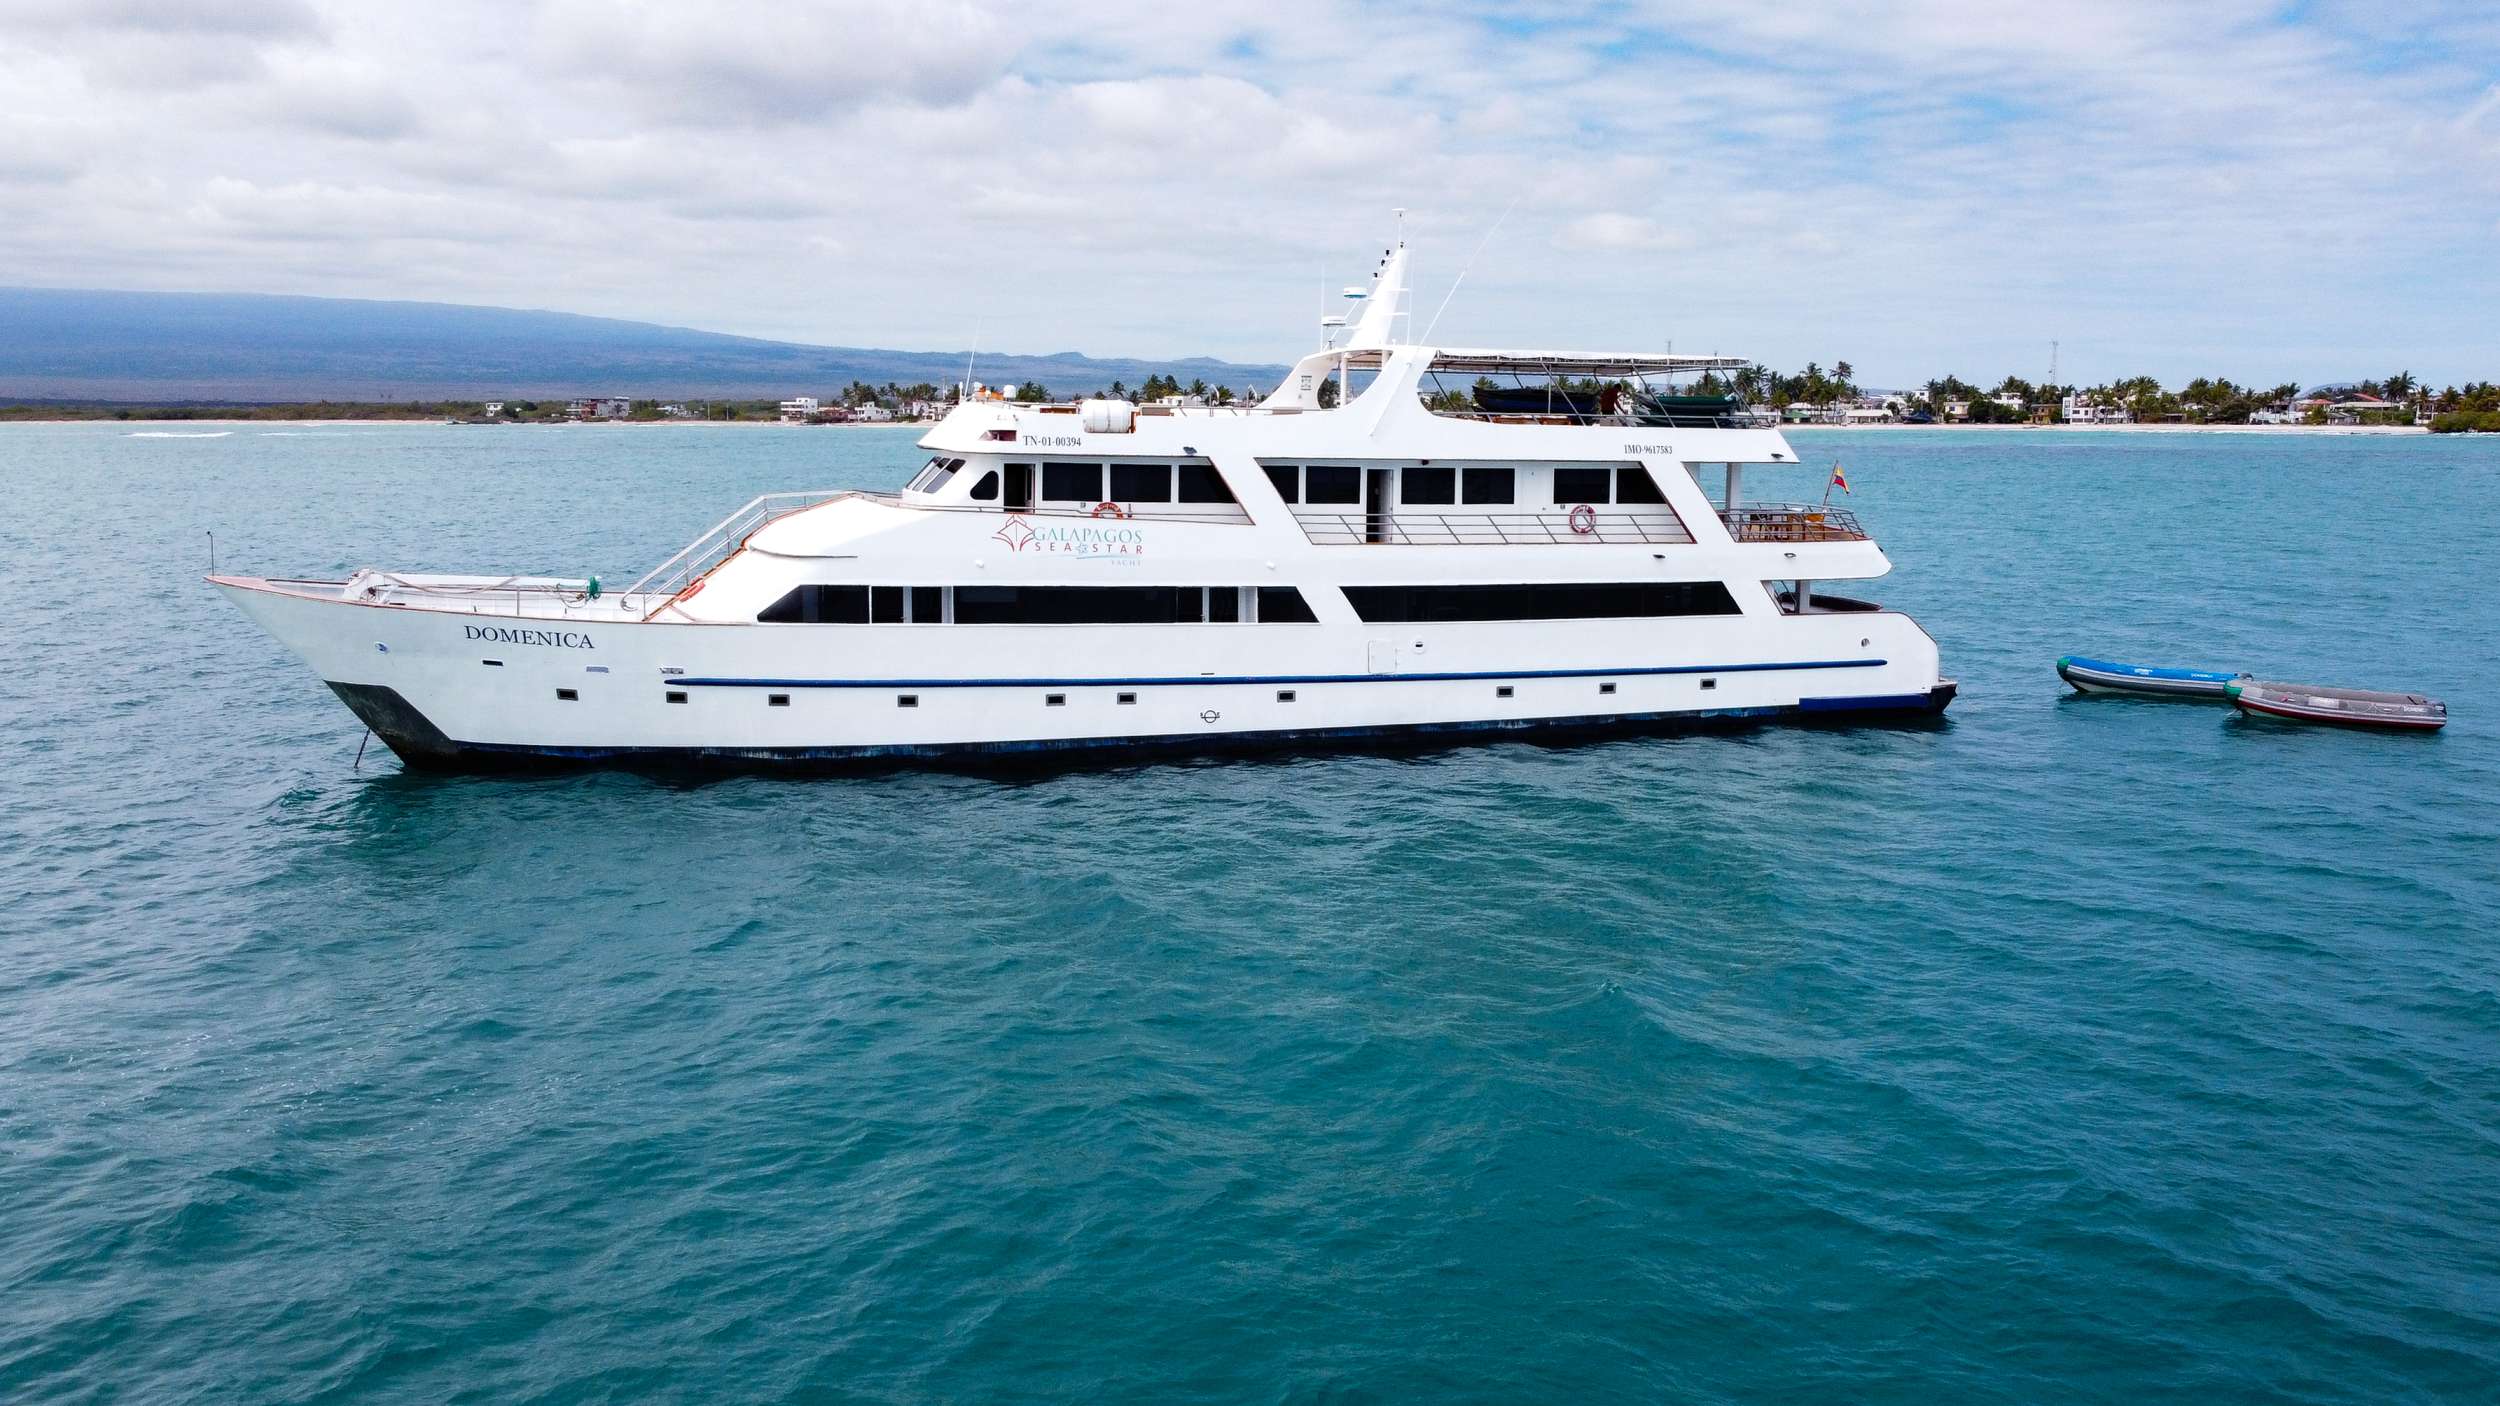 Our yacht combines excellence, privacy and comfort in the marvellous setting of the Galapagos Islands. The M/N Galapagos Sea Star yacht has a capacity for 16 passengers, it features 7 spacious Galapagos &amp; matrimonial suites (25maprox) and 1 Sea Star suite (35m 2 approx.) equipped with panoramic windows to enjoy the wonderful landscapes of the islands, private bathroom, hot/cold water, air conditioning with independent controls, minibar and safe box. Twin beds or one faux king bed and connected suites for families. Locall and International dishes especially designed by our chef, will be served in the cosy atmosphere of our dining room. Our yacht offers a large solarium with shaded and uncovered areas, two Jacuzzis and comfortable sun loungers.  Social areas include saloon, mini library and video library and a play zone for kids (during family departures). Snorkeling equipment and kayaks will be available without any extra charge. The Galapagos Sea Star yacht offers avid travellers the opportunity to experience close encounters with the unique wildlife of the Galapagos Islands. We invite you to join us on board our Exclusive Luxury Class yacht and admire the wonders of evolution as you enjoy all the creature comforts of home topped off with world class service. The best way for a traveller to make the most of their Galapagos vacation time is to cruise around the Islands and experience several visitor sites each day. We offer one of the best planned itineraries on board the best built liveaboard yacht. Our shore excursions have been crafted with care and allow passengers to see up close the Galapagos animals and how they have adapted to the harsh island conditions. On your Galapagos vacation we also make sure that survival of the fittest is observed and not experienced... this is why we designed the M/N Galapagos Sea Star yacht, an exclusive luxury class yacht that represents a true evolution in the private yacht cruise industry.  You will not find a private yacht in the Galapagos Islands that offers more space, comfort or service on a 16 passenger boat. Amenities on board include a jacuzzi, al fresco dining area, spacious sun and shade decks, combined with elegant interiors and a cabin layout that allows for picture windows that can be opened for fresh air flow. A great Galapagos vacation itinerary that includes the main wildlife highlights what the Galapagos Islands have to offer. A variety of visitor sites including volcano hikes, Island trails, mangrove forests, turtle breeding farms, research centers, marine sites and more. A cruise on board the M/N Galapagos Sea Star yacht will allow visitors to explore the both land animals and marine fauna of the Galapagos archipelago. Activities you can enjoy are trekking, horseback riding, snorkeling, scuba diving, beachcombing amongst others.